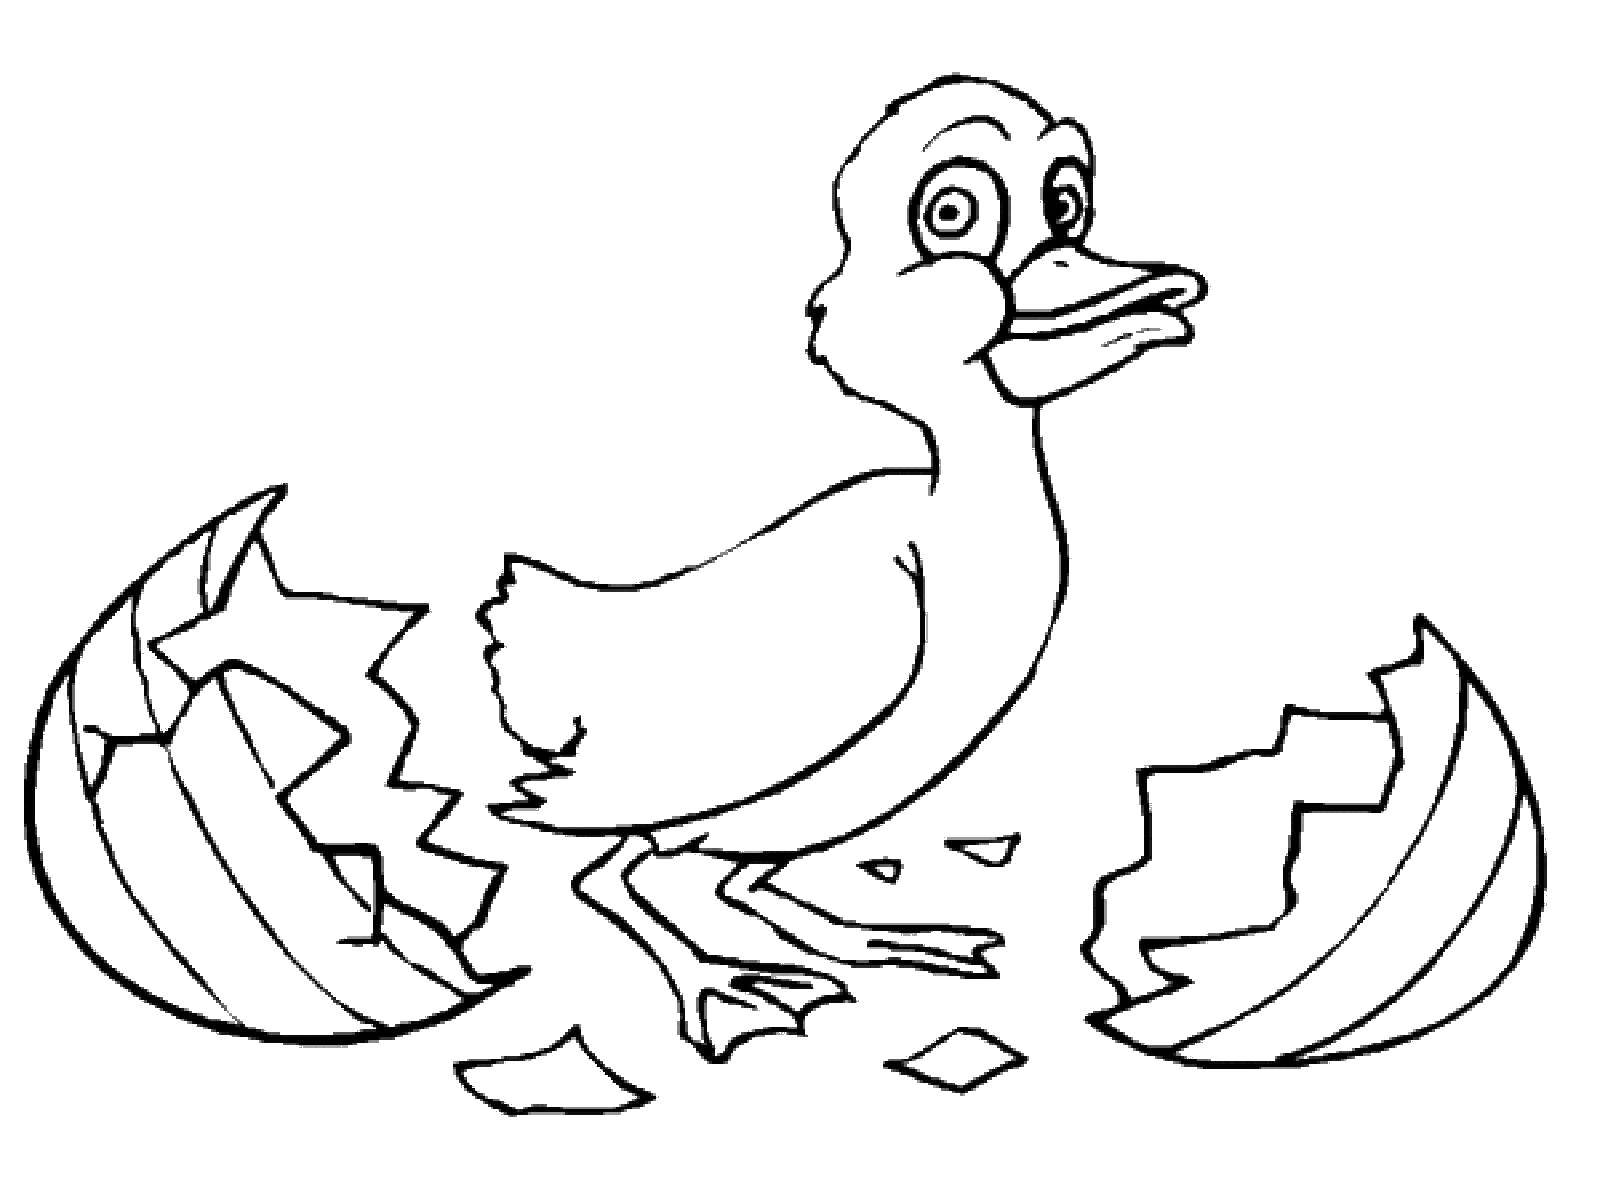 Coloring Duck. Category coloring Easter. Tags:  duckling, egg.